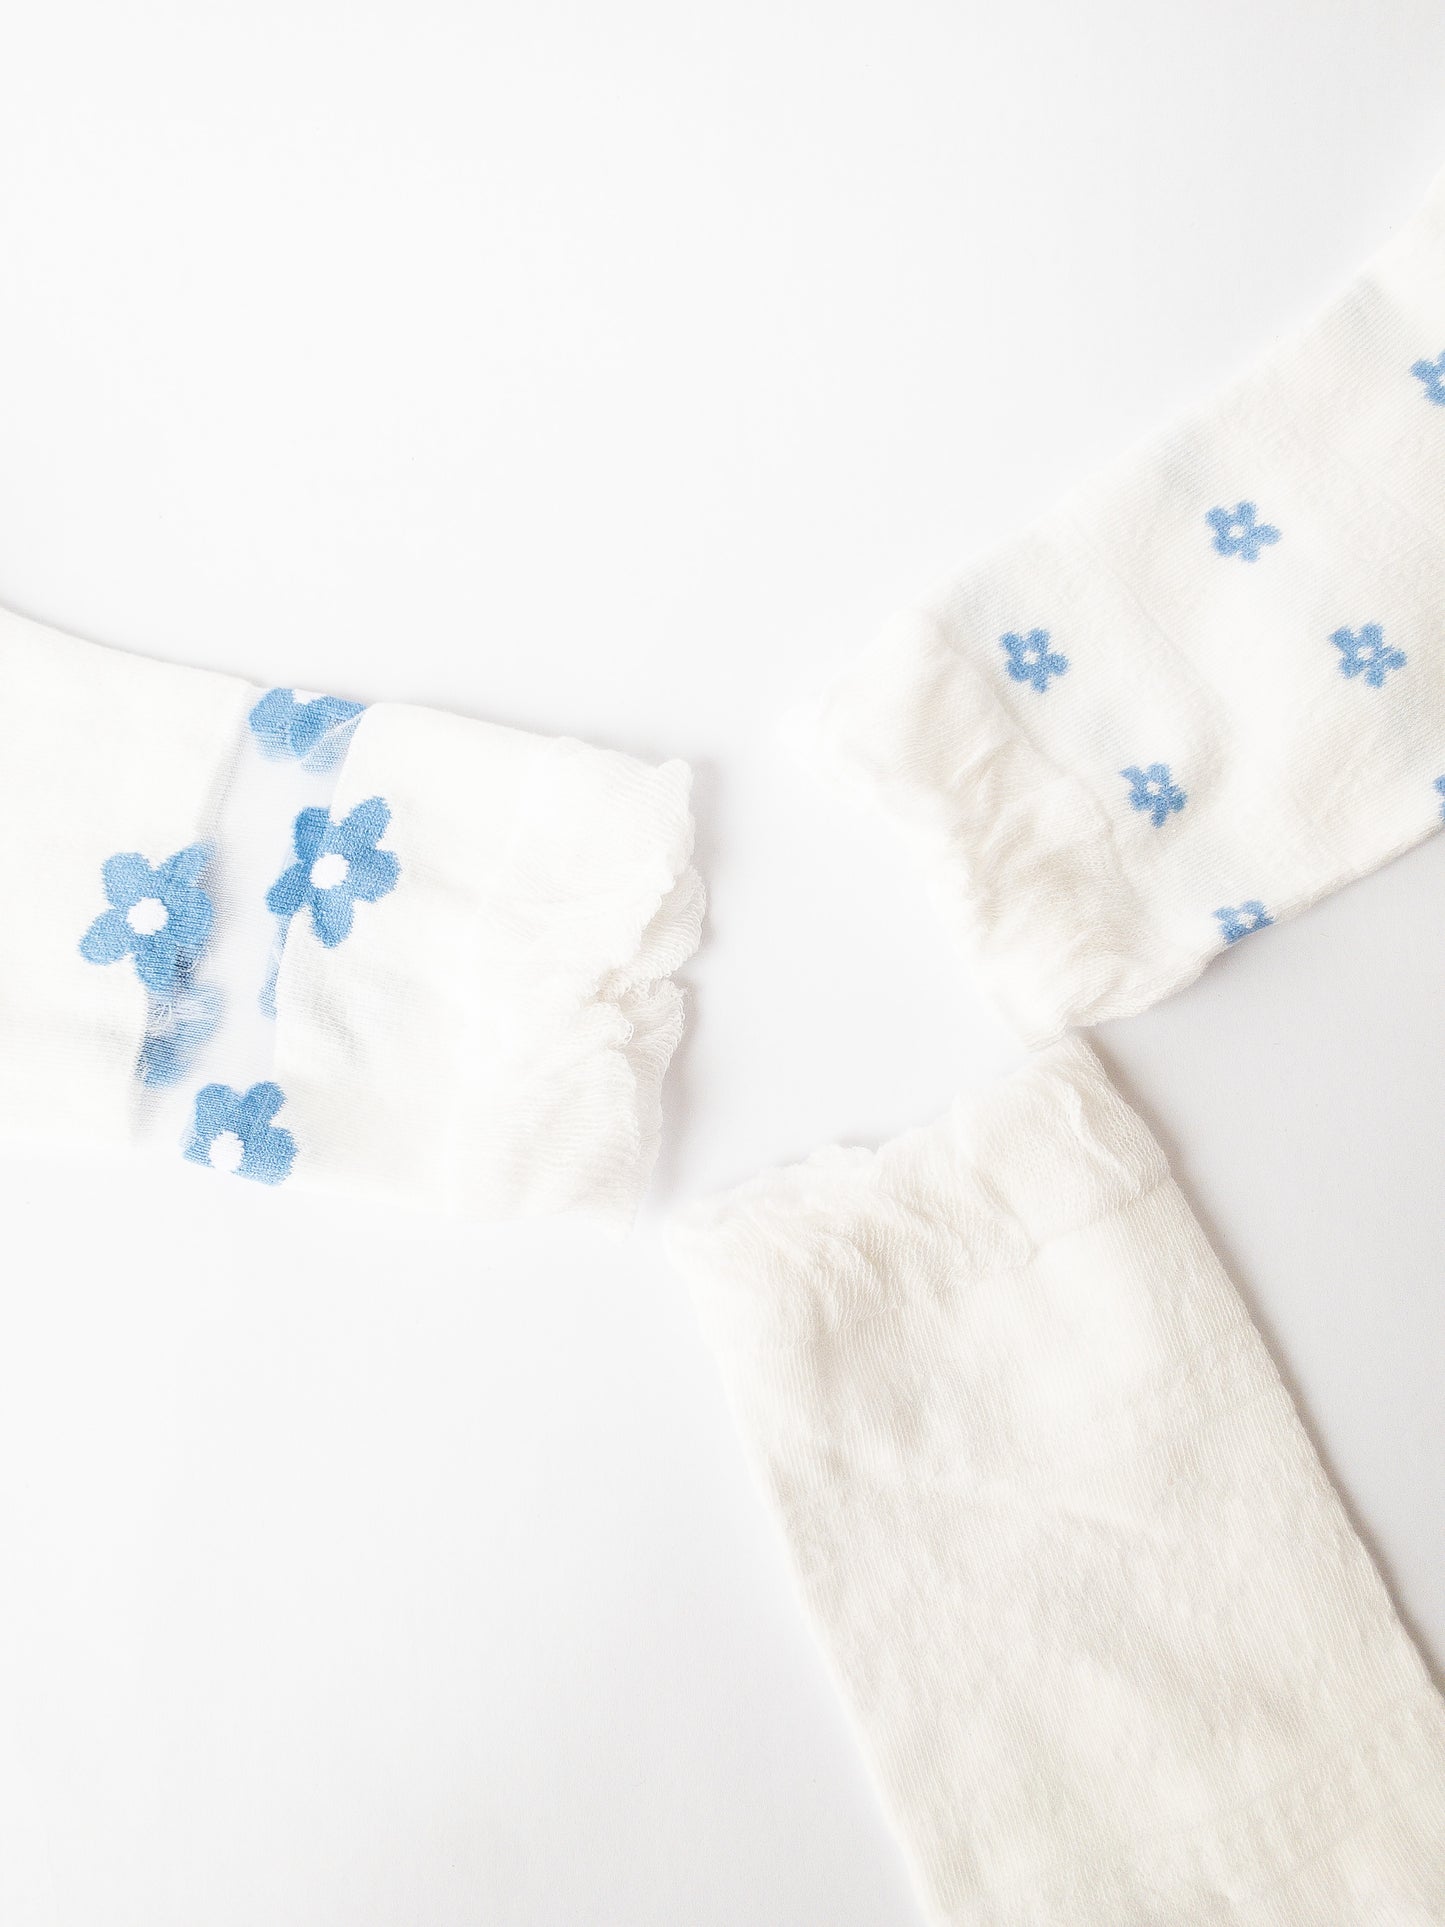 A soft floral socks set of 3 of the gentlest socks with tender ruffles. One pair is classic white and blue, one pair has delicate blue flowers throughout, and one pair is solid white with a sheer peekaboo floral lace.  Adult size 4-10, crew socks length.